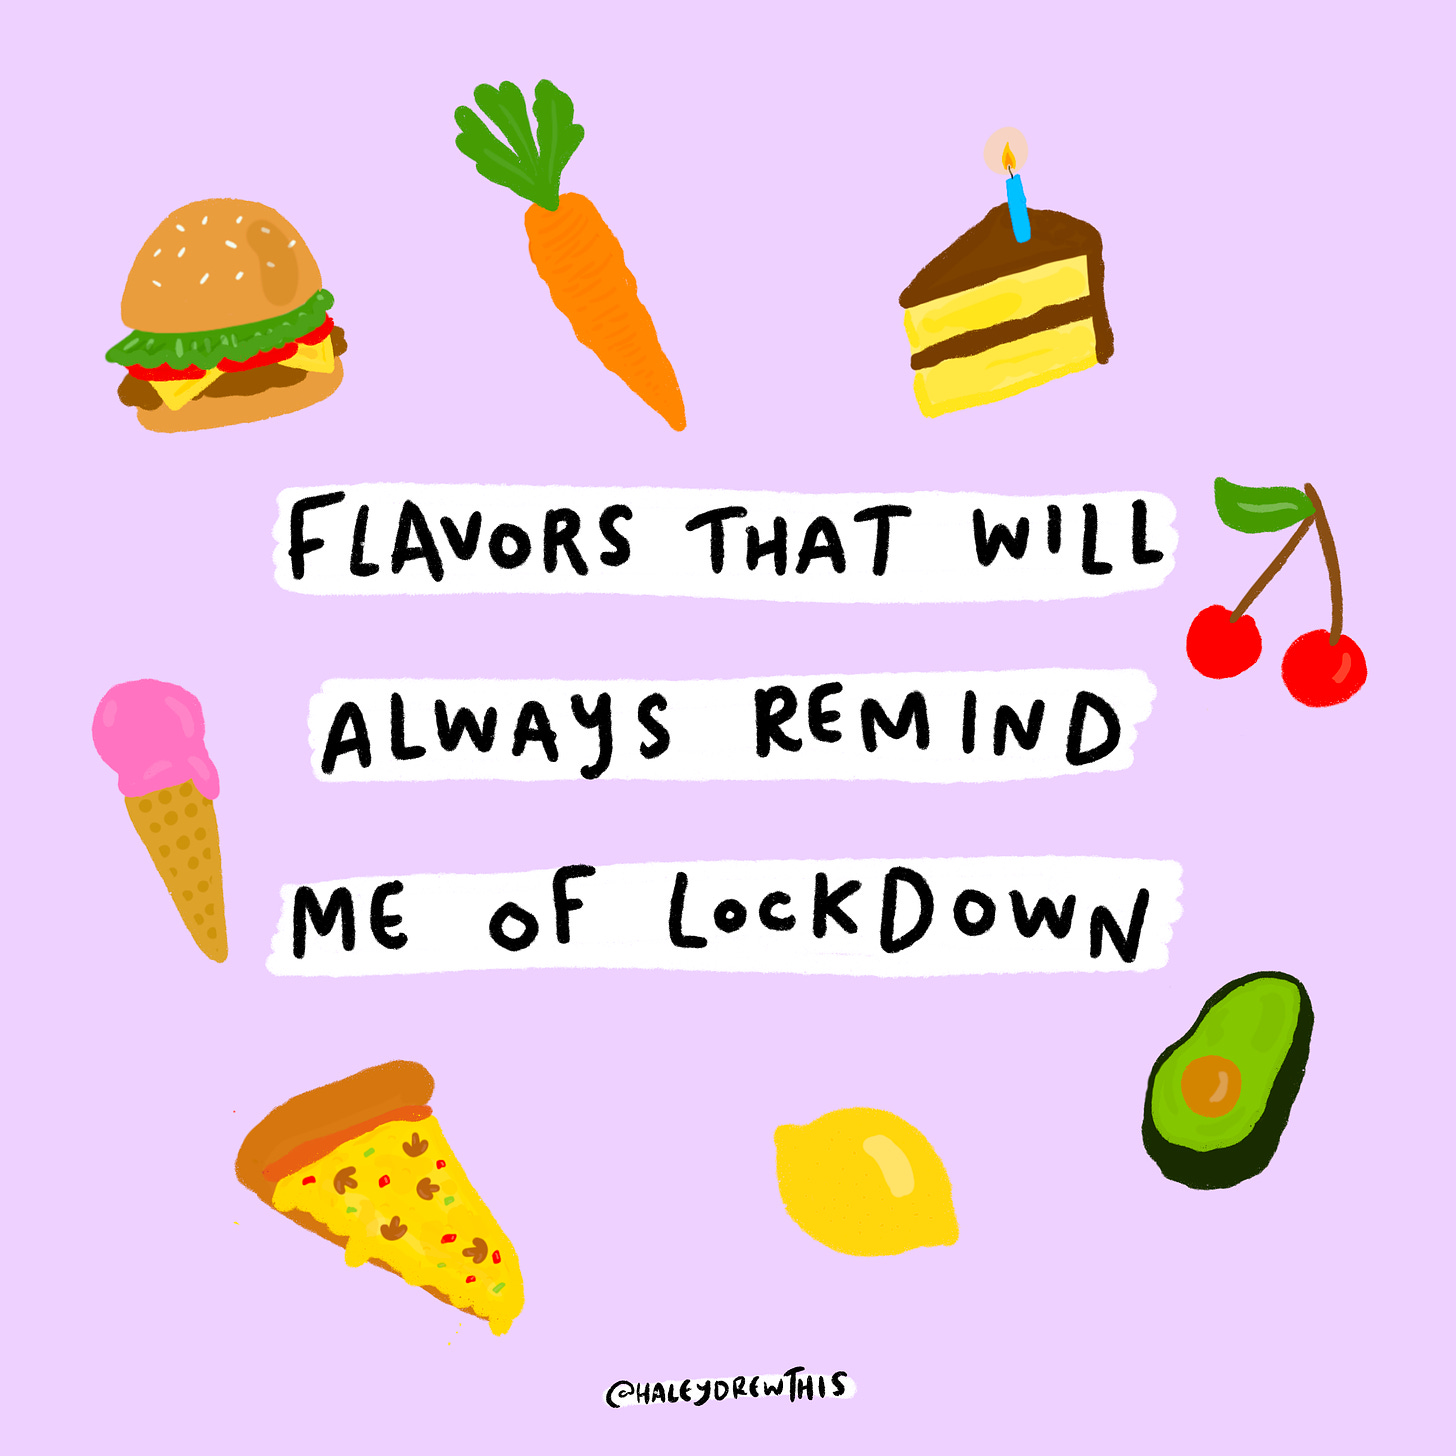 Text says: "Flavors that will always remind me of lockdown," surrounded by foods